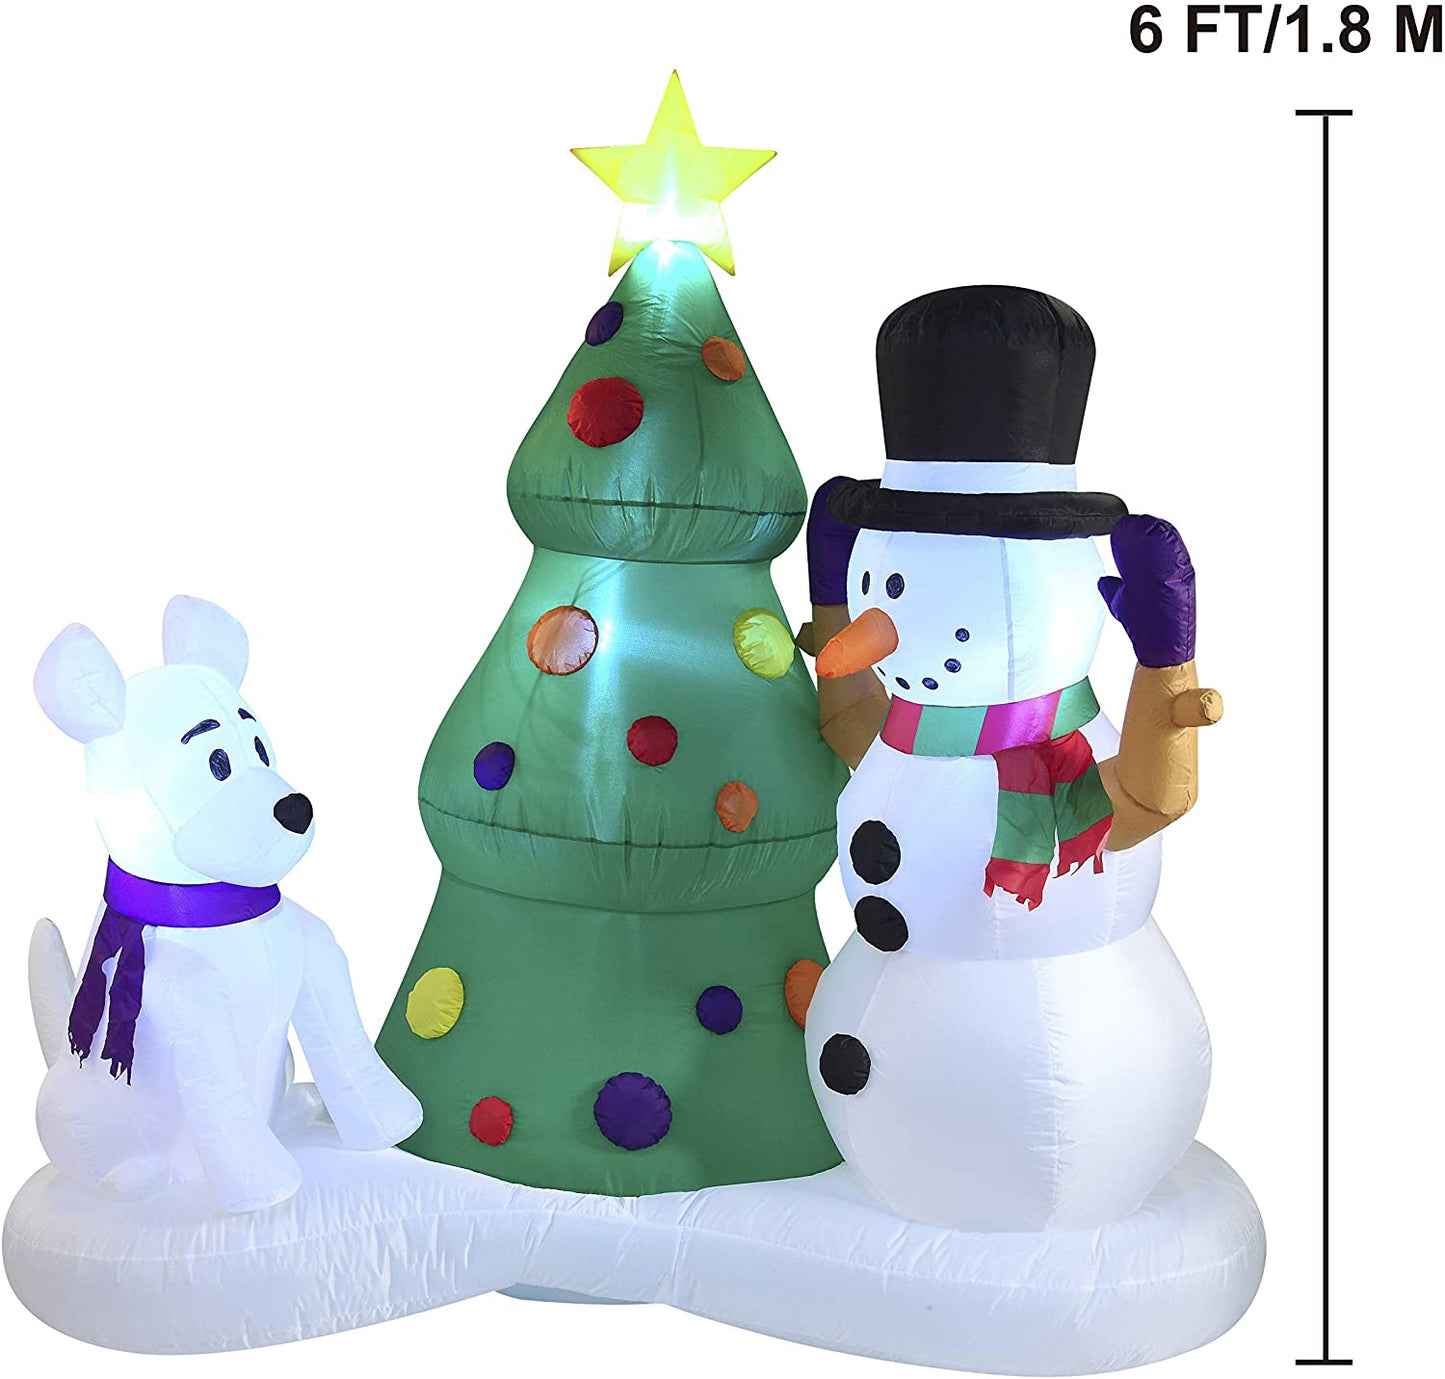 Large Snowman with Christmas Tree Inflatable (6 ft)